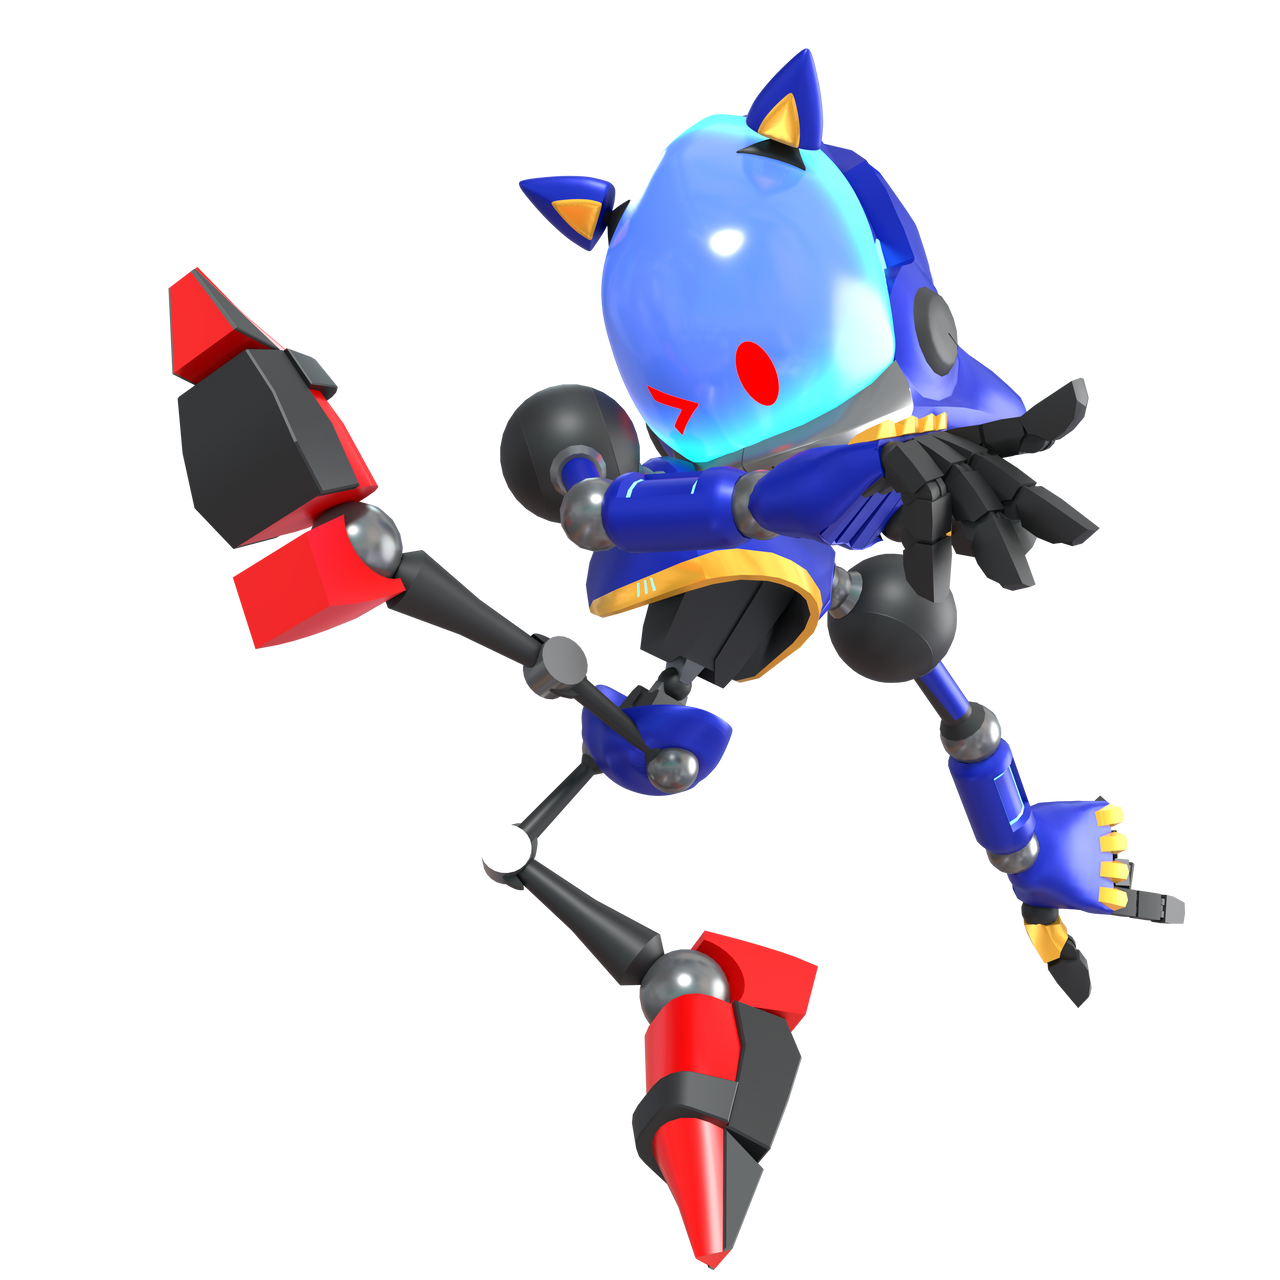 And then a Sonic Chaos remake by TheGoku7729 on DeviantArt